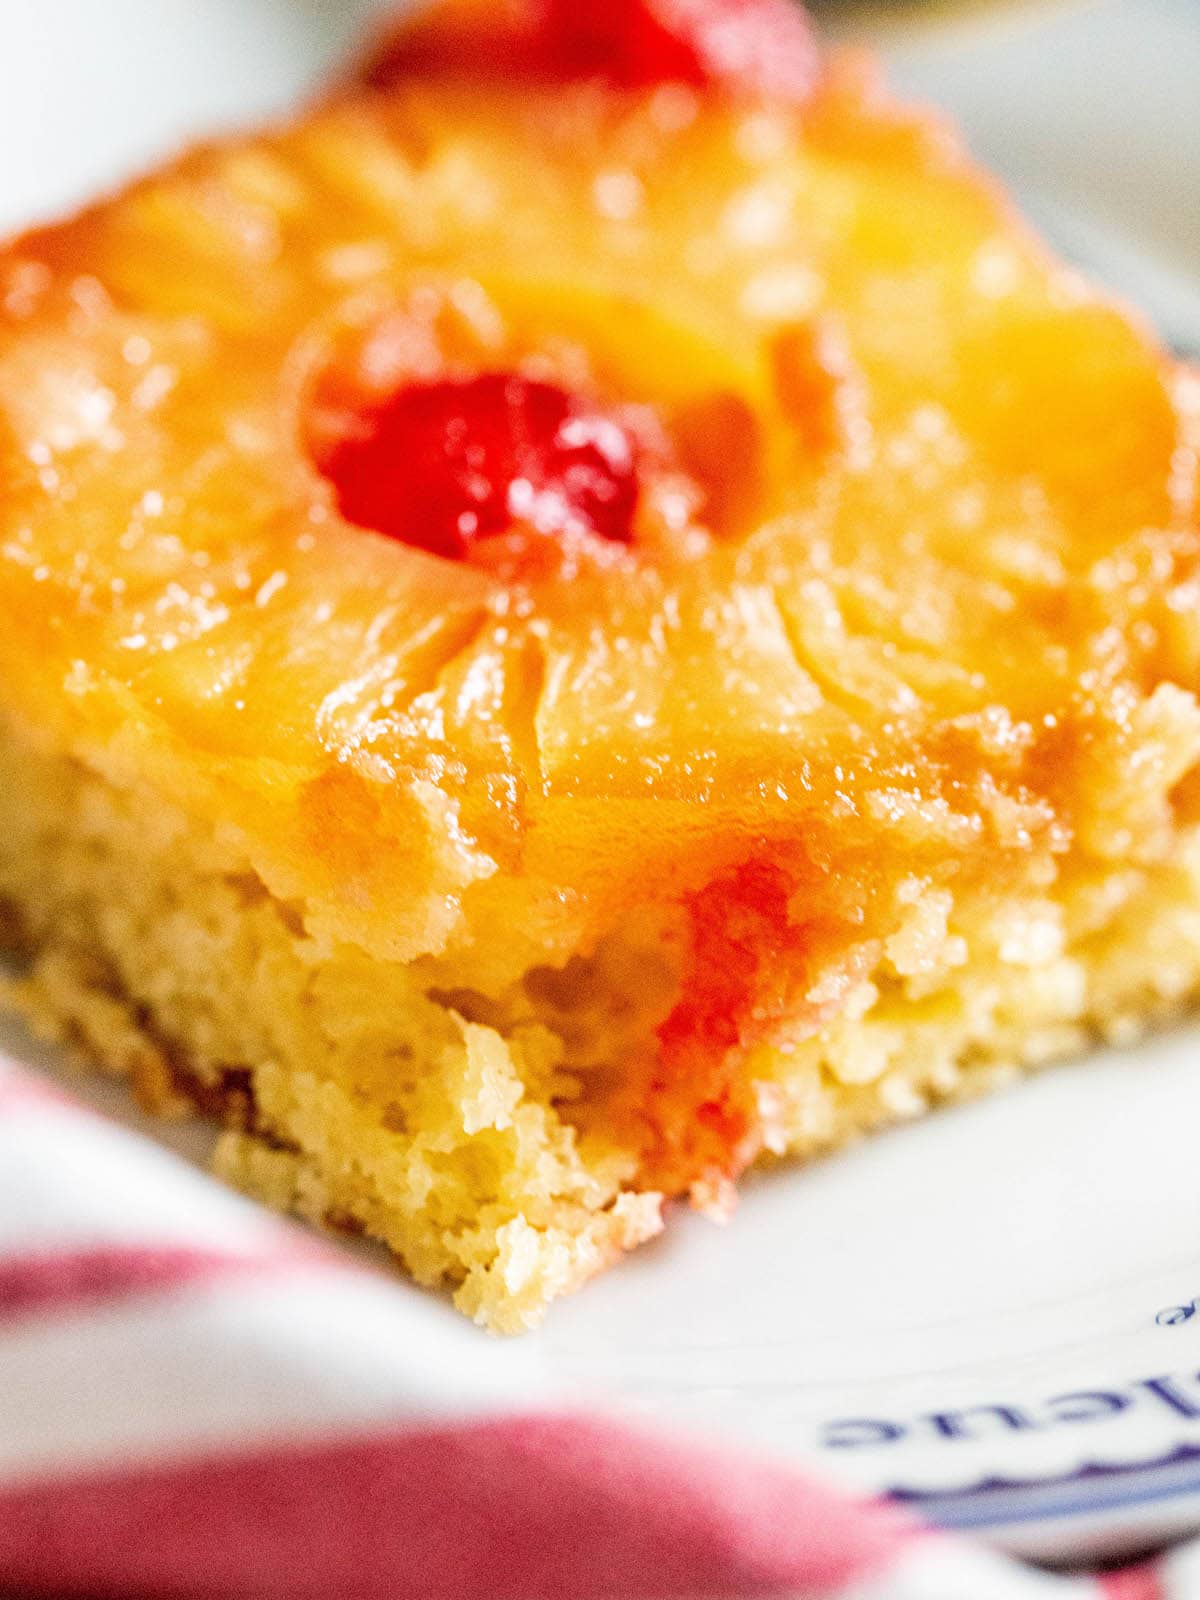 picture of a slice of pineapple upside down cake with a pineapples and maraschino cherries baked onto the top